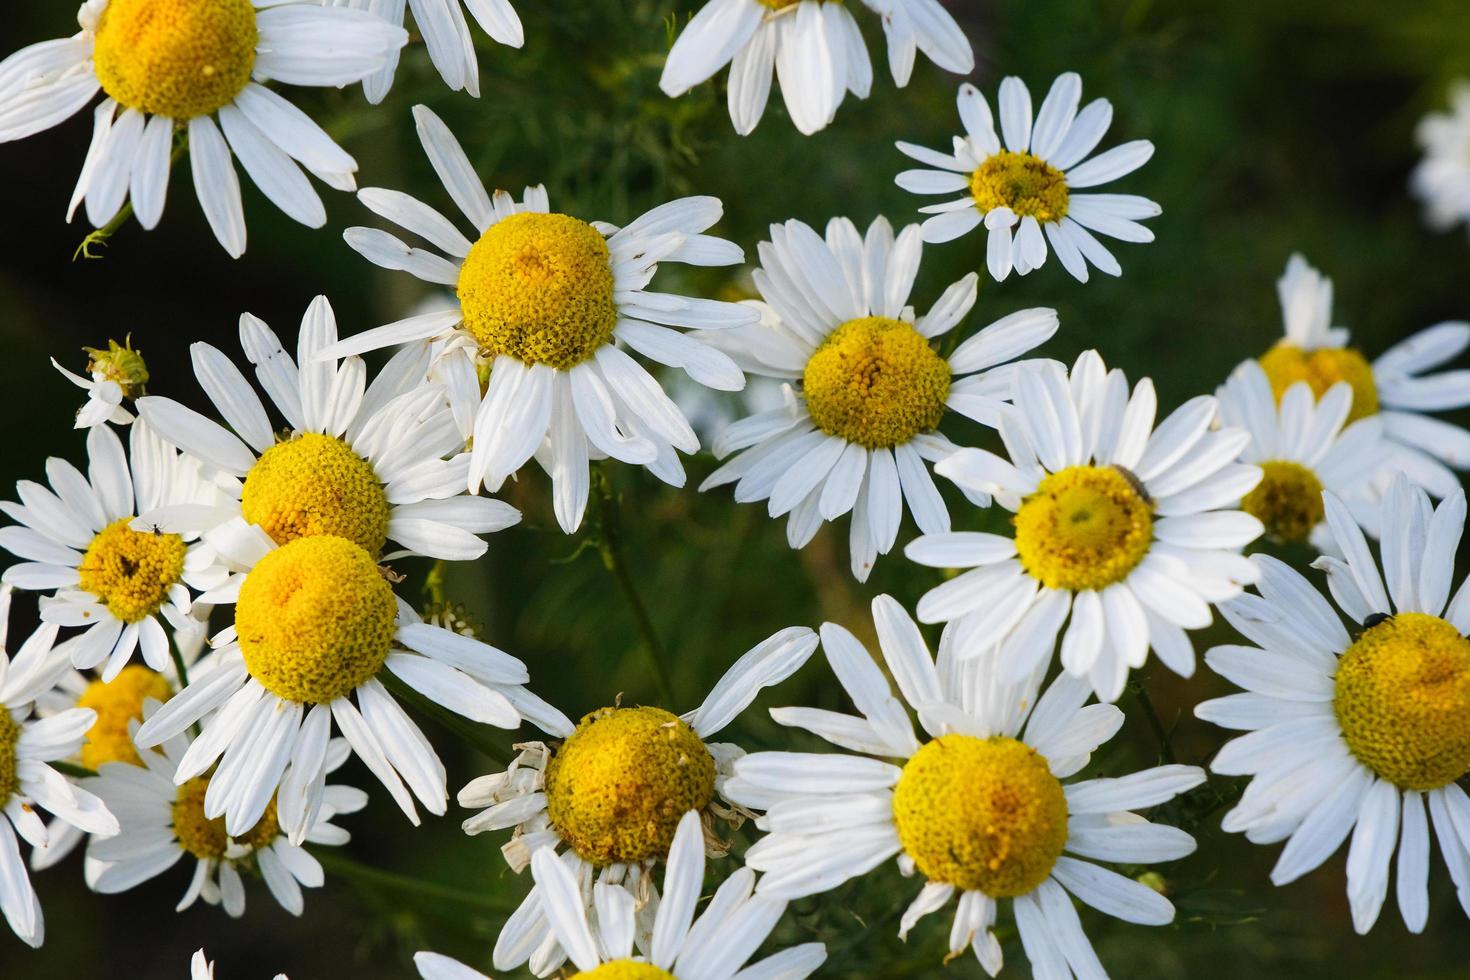 Blooming yellow camomile flowers with white petals in a field photo